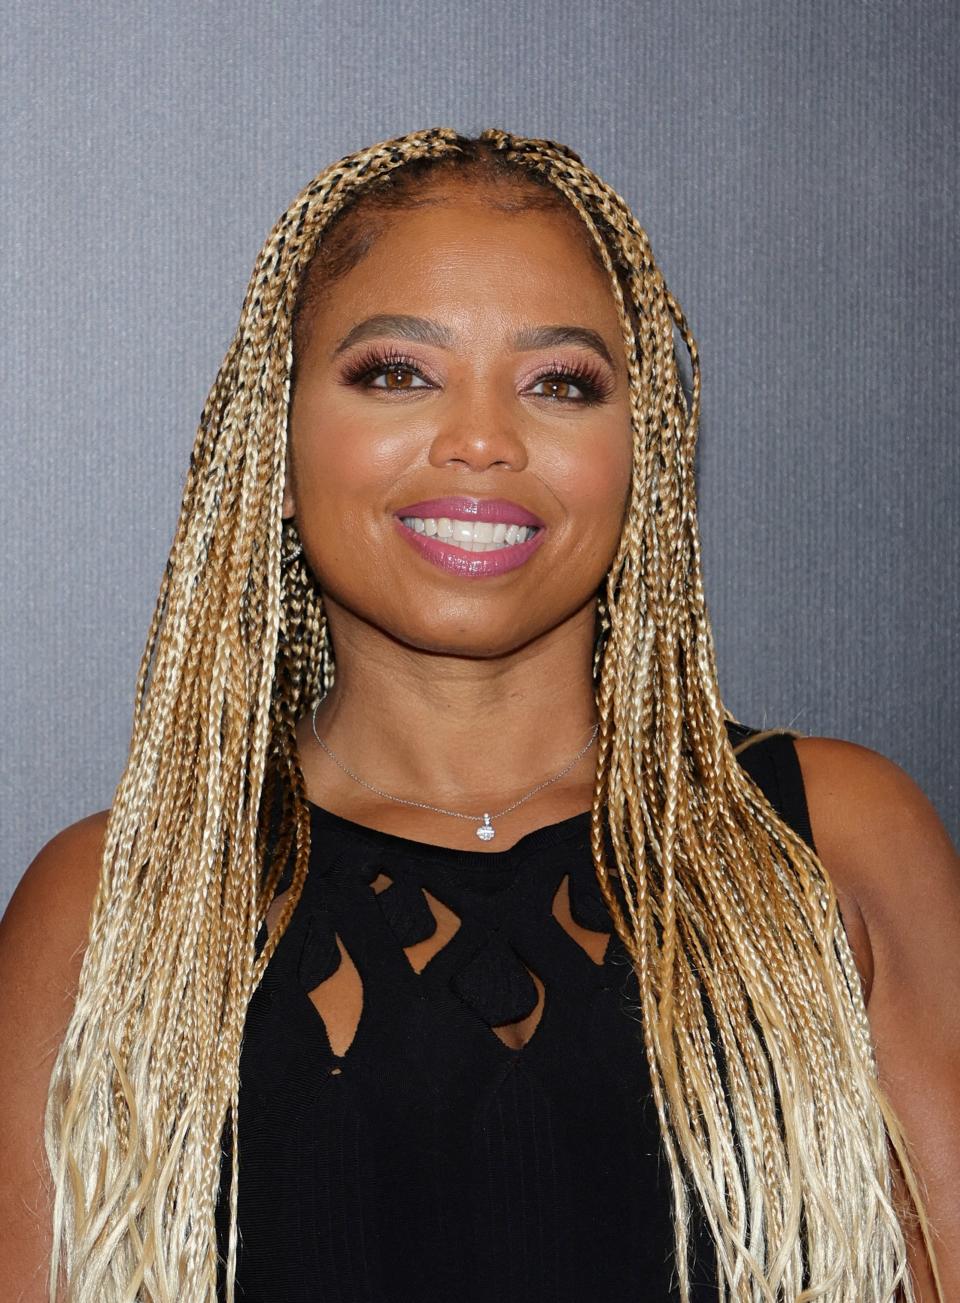 LAS VEGAS, NEVADA - MAY 28: Sports journalist Jemele Hill, recipient of the William C. Rhoden Sports Media Award, attends the Advancement of Blacks in Sports (ABIS) Champions and Legends Awards at Resorts World Las Vegas on May 28, 2022 in Las Vegas, Nevada. (Photo by Ethan Miller/Getty Images) ORG XMIT: 775818434 ORIG FILE ID: 1399895881